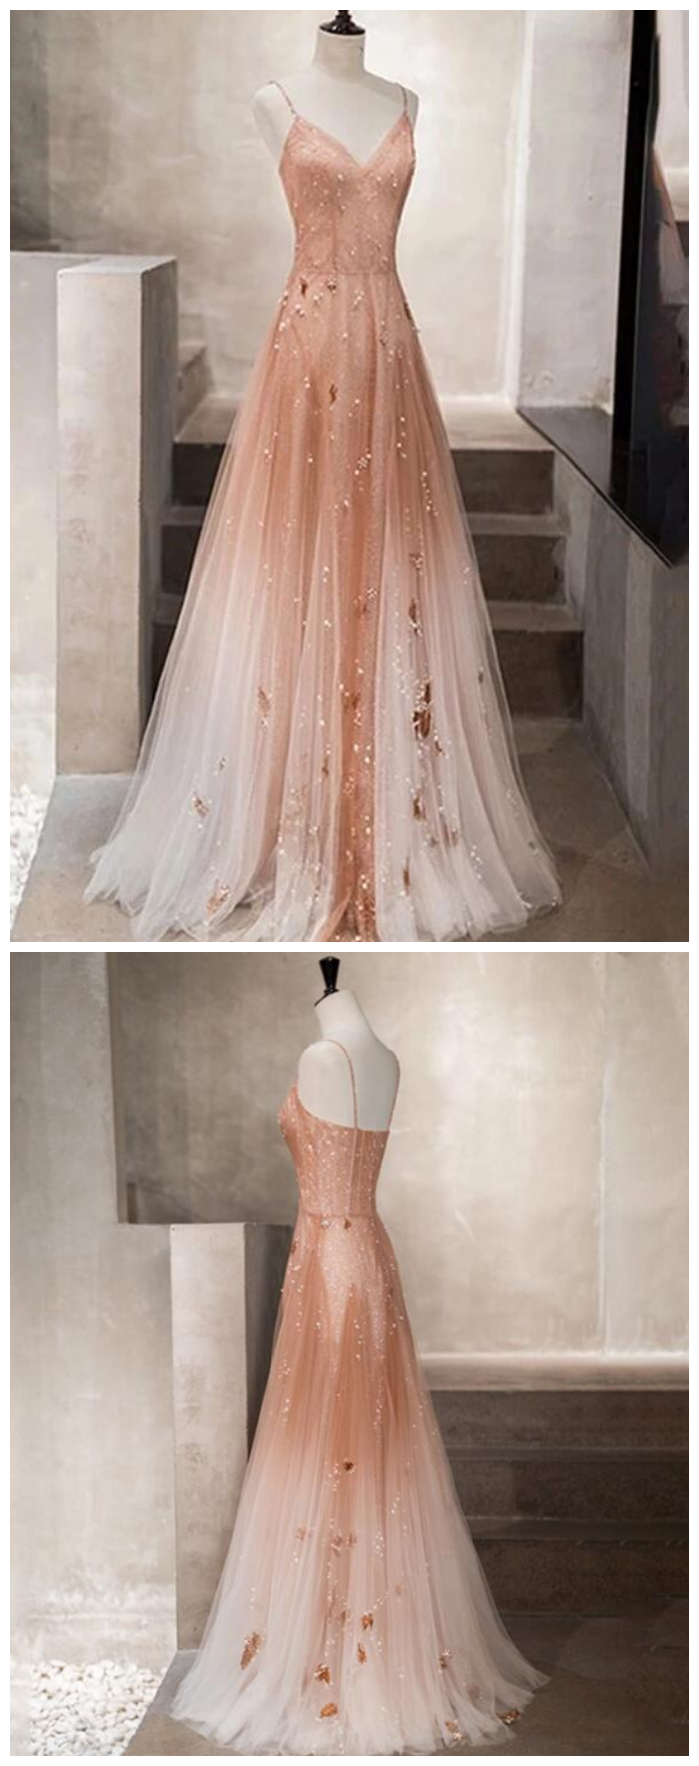 Beautifultulle Straps Pearls Long Wedding Party Dress, Elegant Party Dress